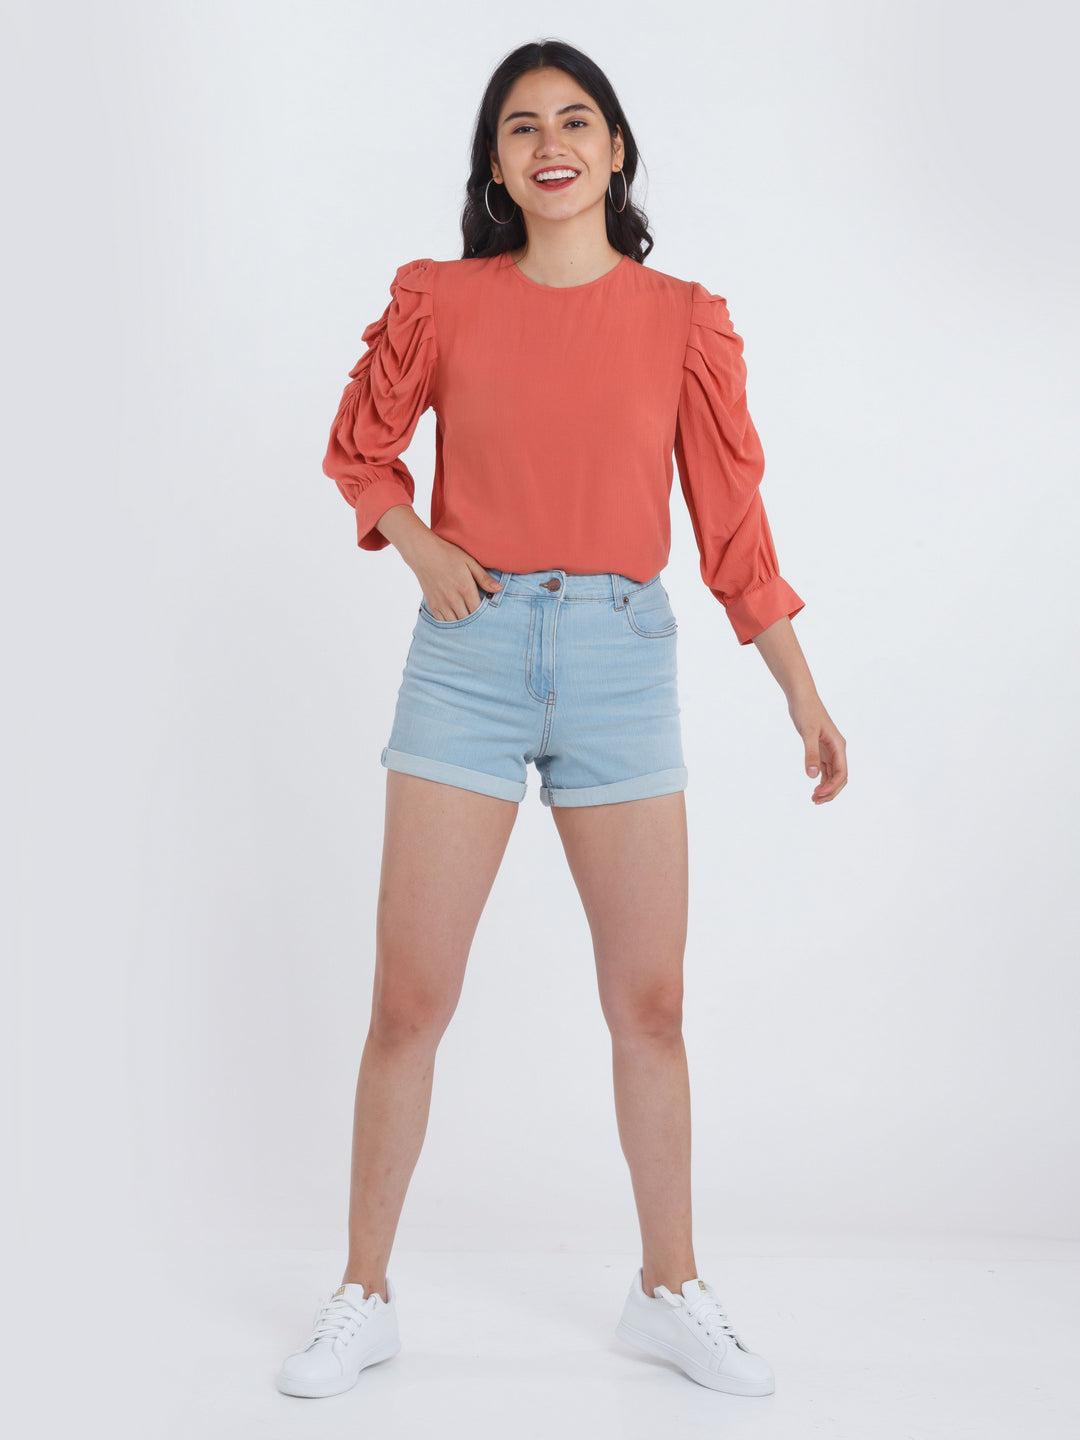 blue-solid-jeans-shorts-for-women